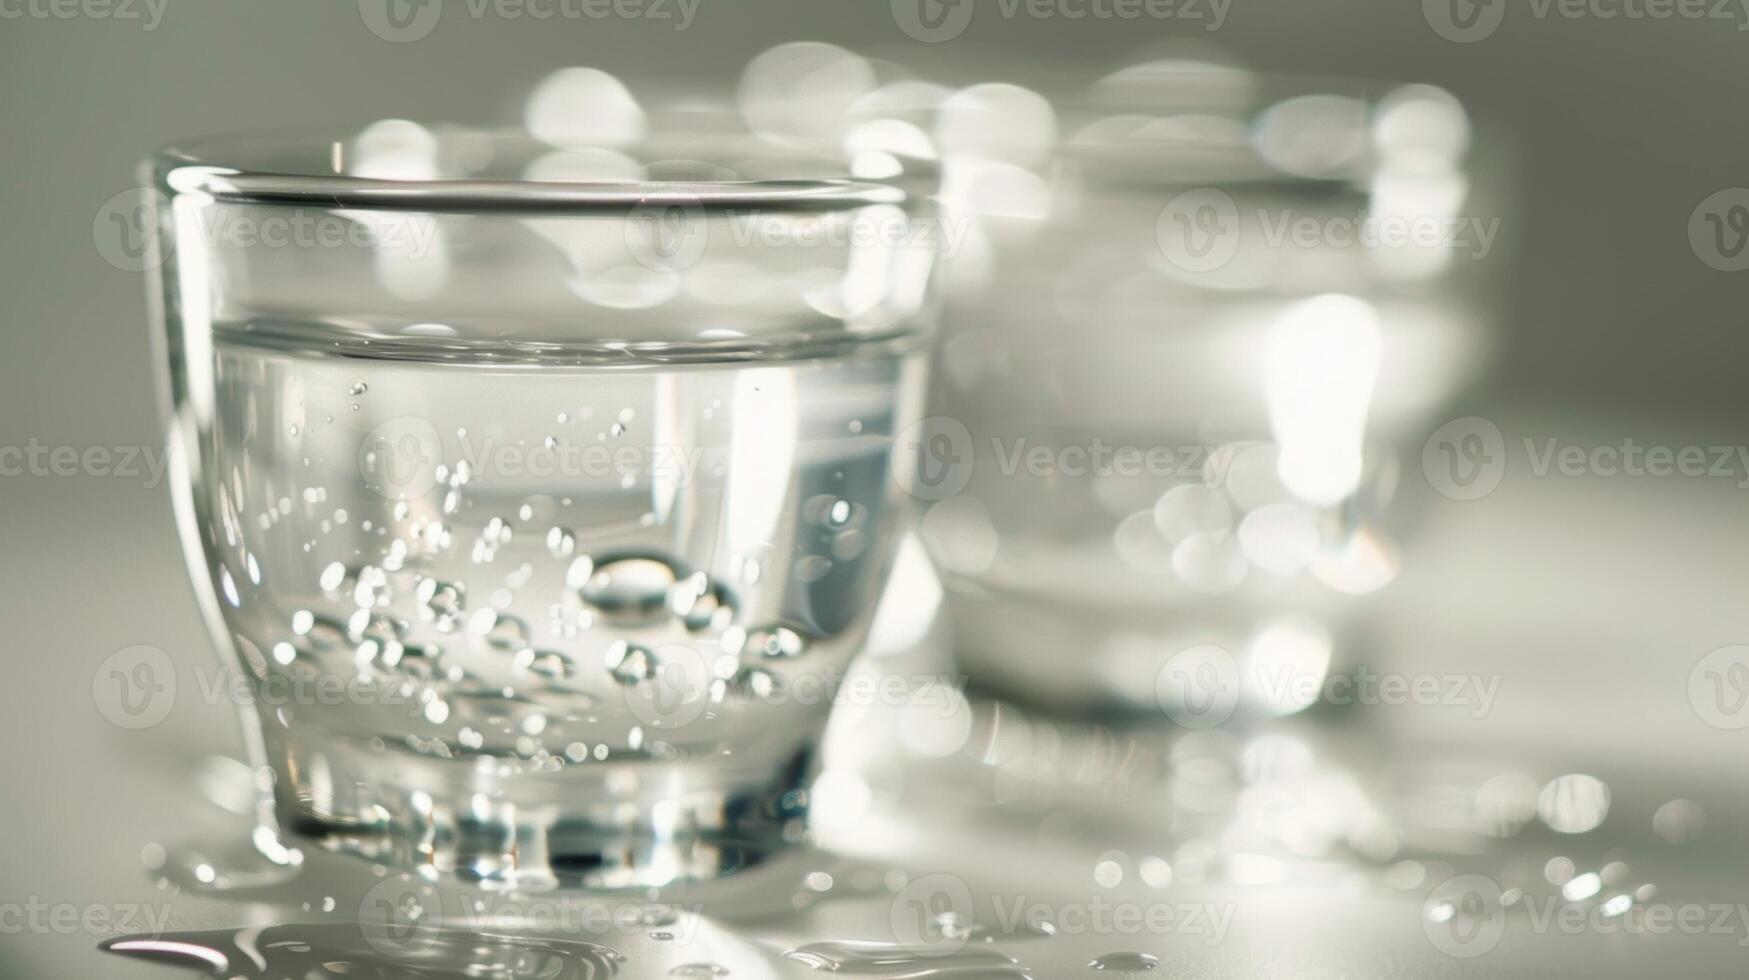 Glasses filled with clear colorless liquid that resembles vodka but without the alcoholic content giving guests the option for a nonalcoholic alternative photo